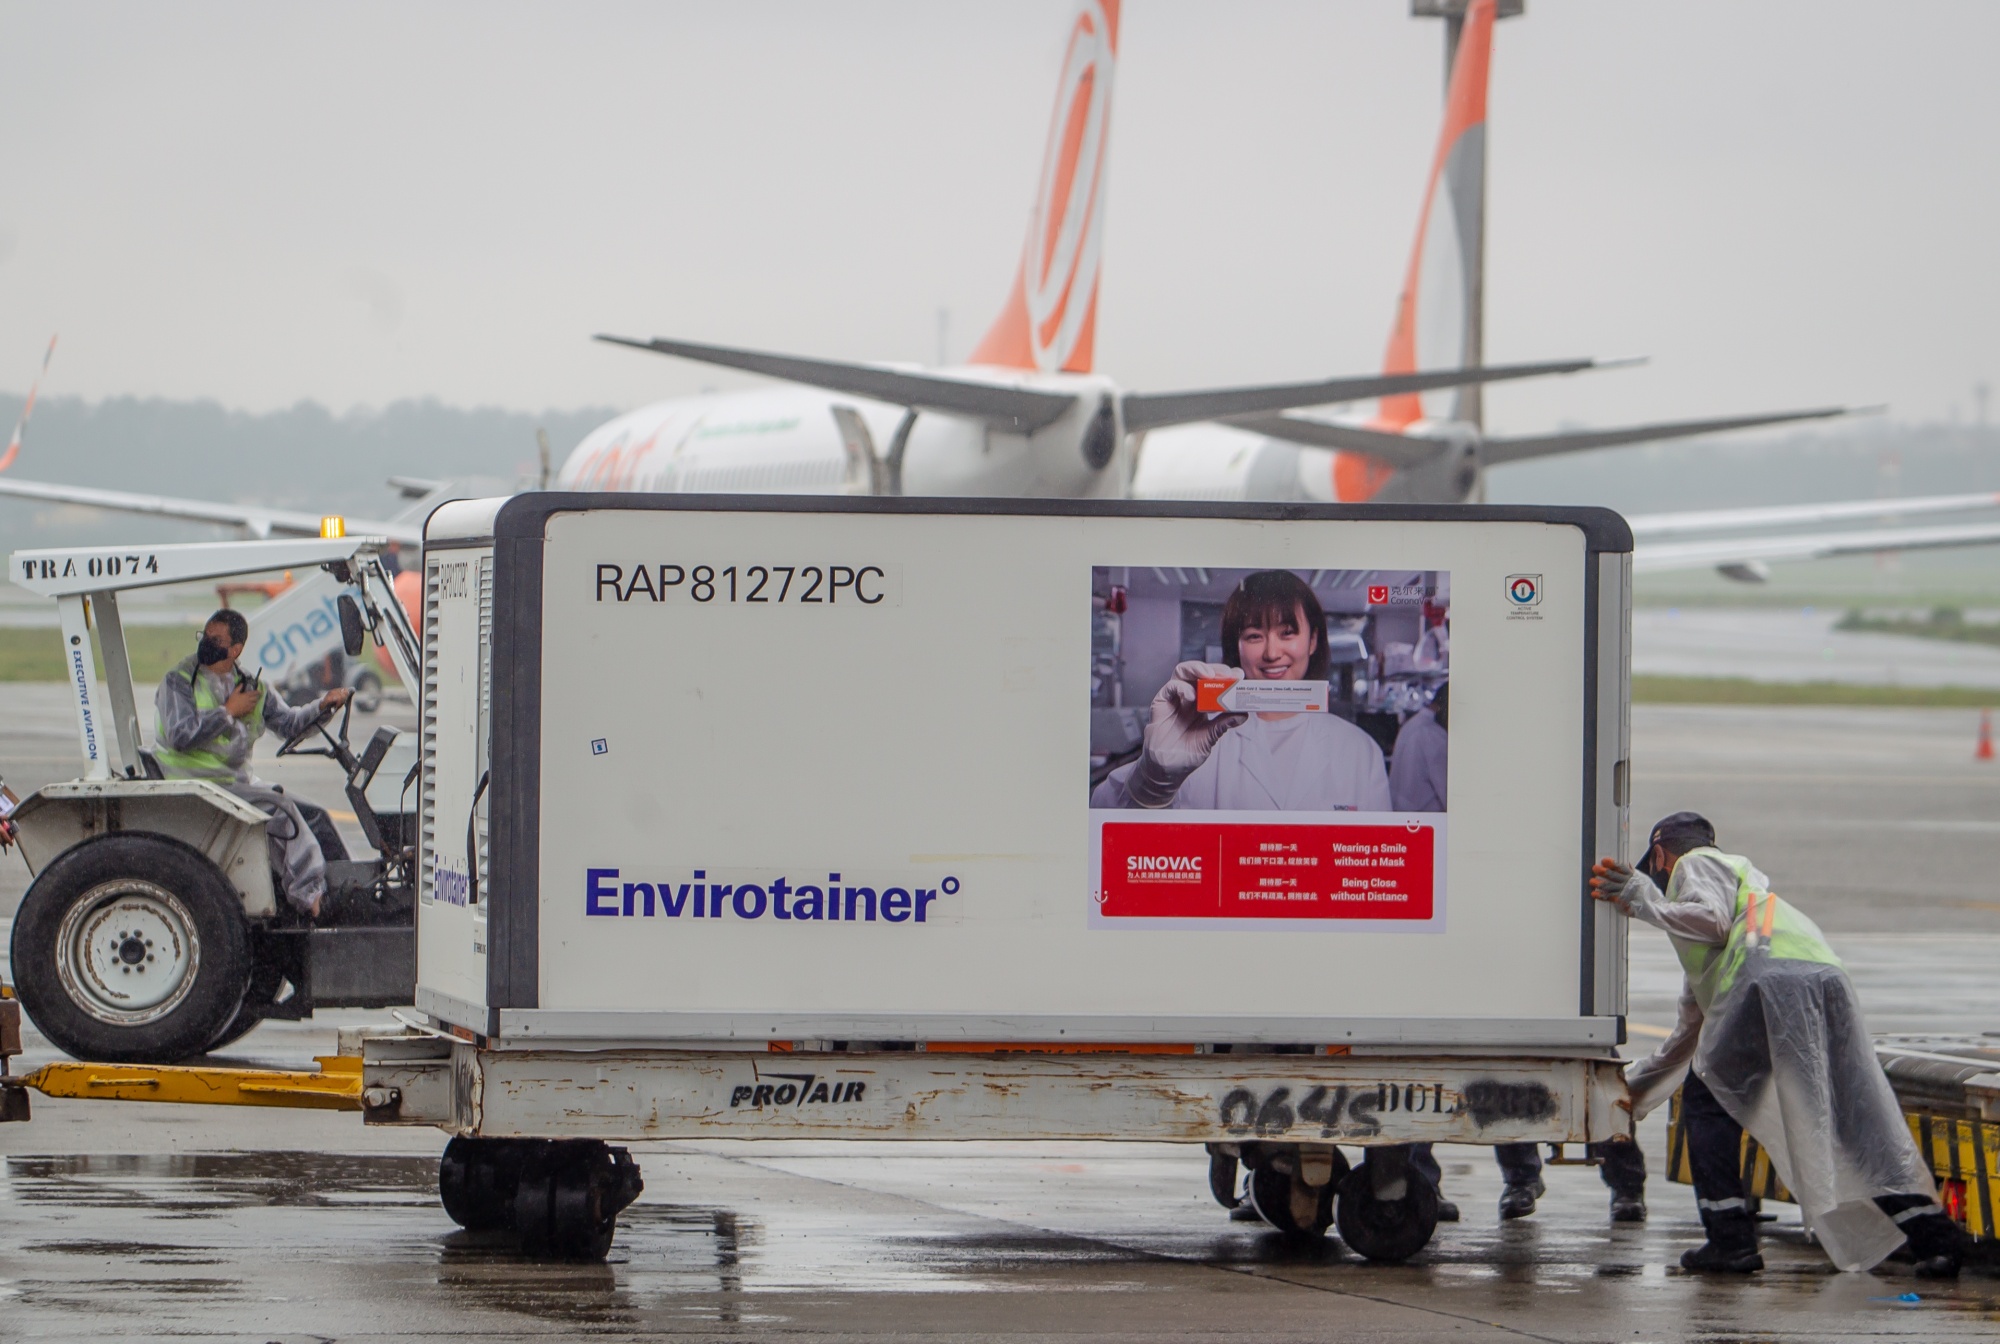 Workers unload a refrigerated container containing Sinovac Biotech Ltd. coronavirus vaccine.  at Guarulhos International Airport in Sao Paulo on November 19.